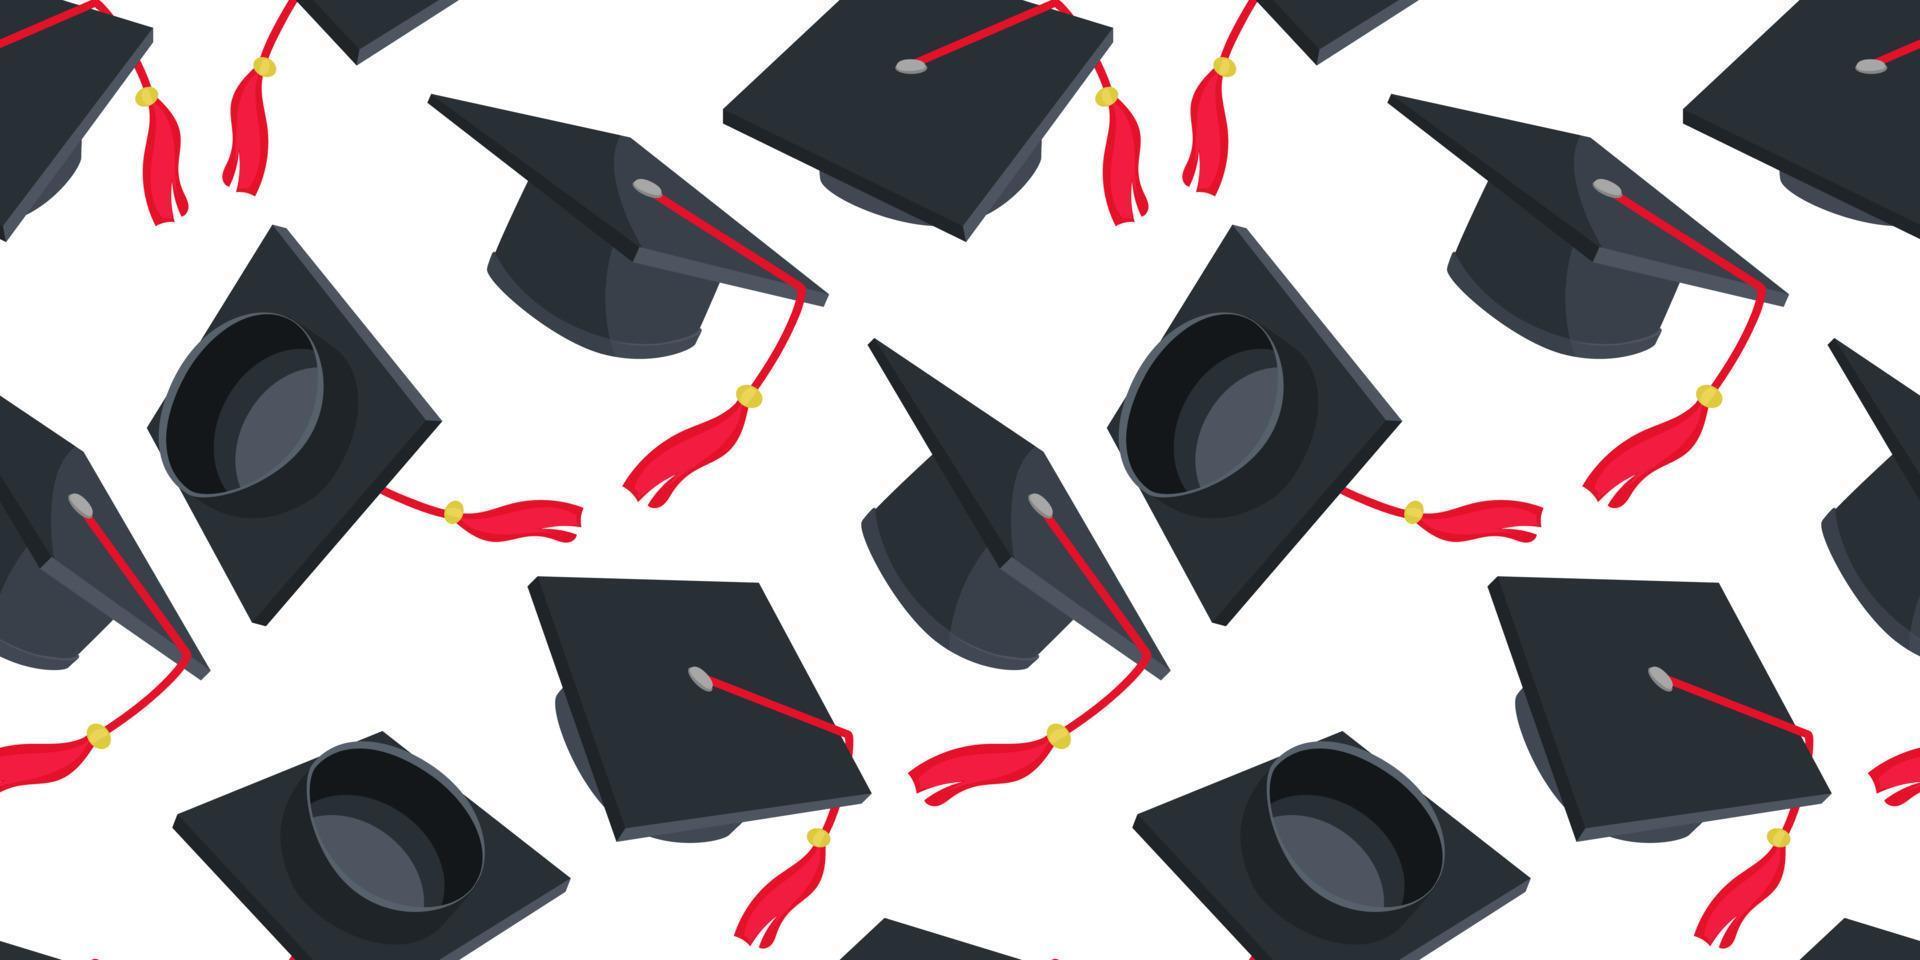 The pattern of academic hats in different angles. High school or college graduation. Class 2023 in black and red. Congratulations to the graduates of 2023 with a background postcard. Packaging vector